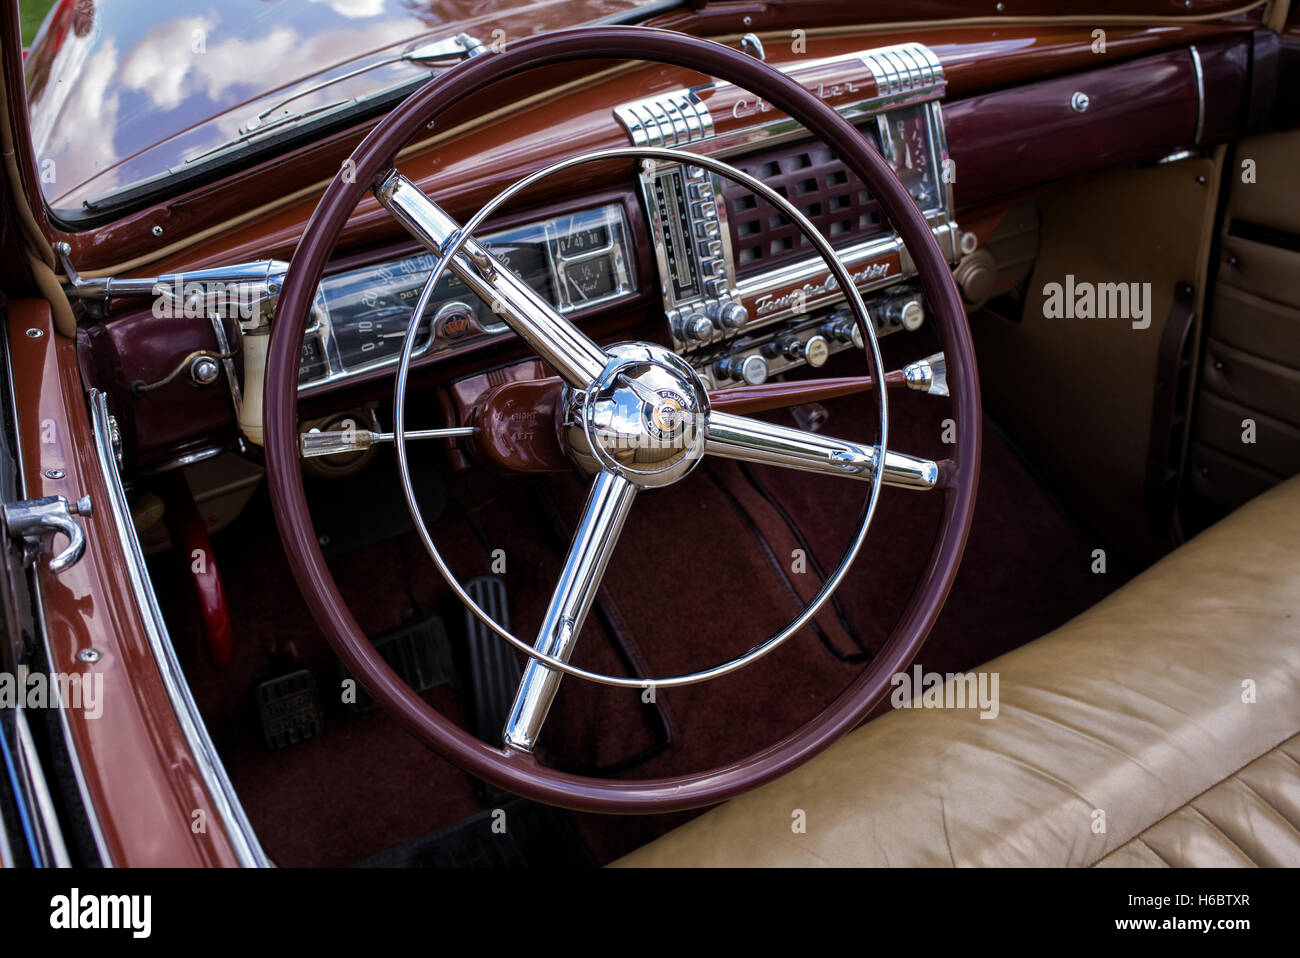 1947 Chrysler steering wheel and dashboard. Classic American car Stock Photo